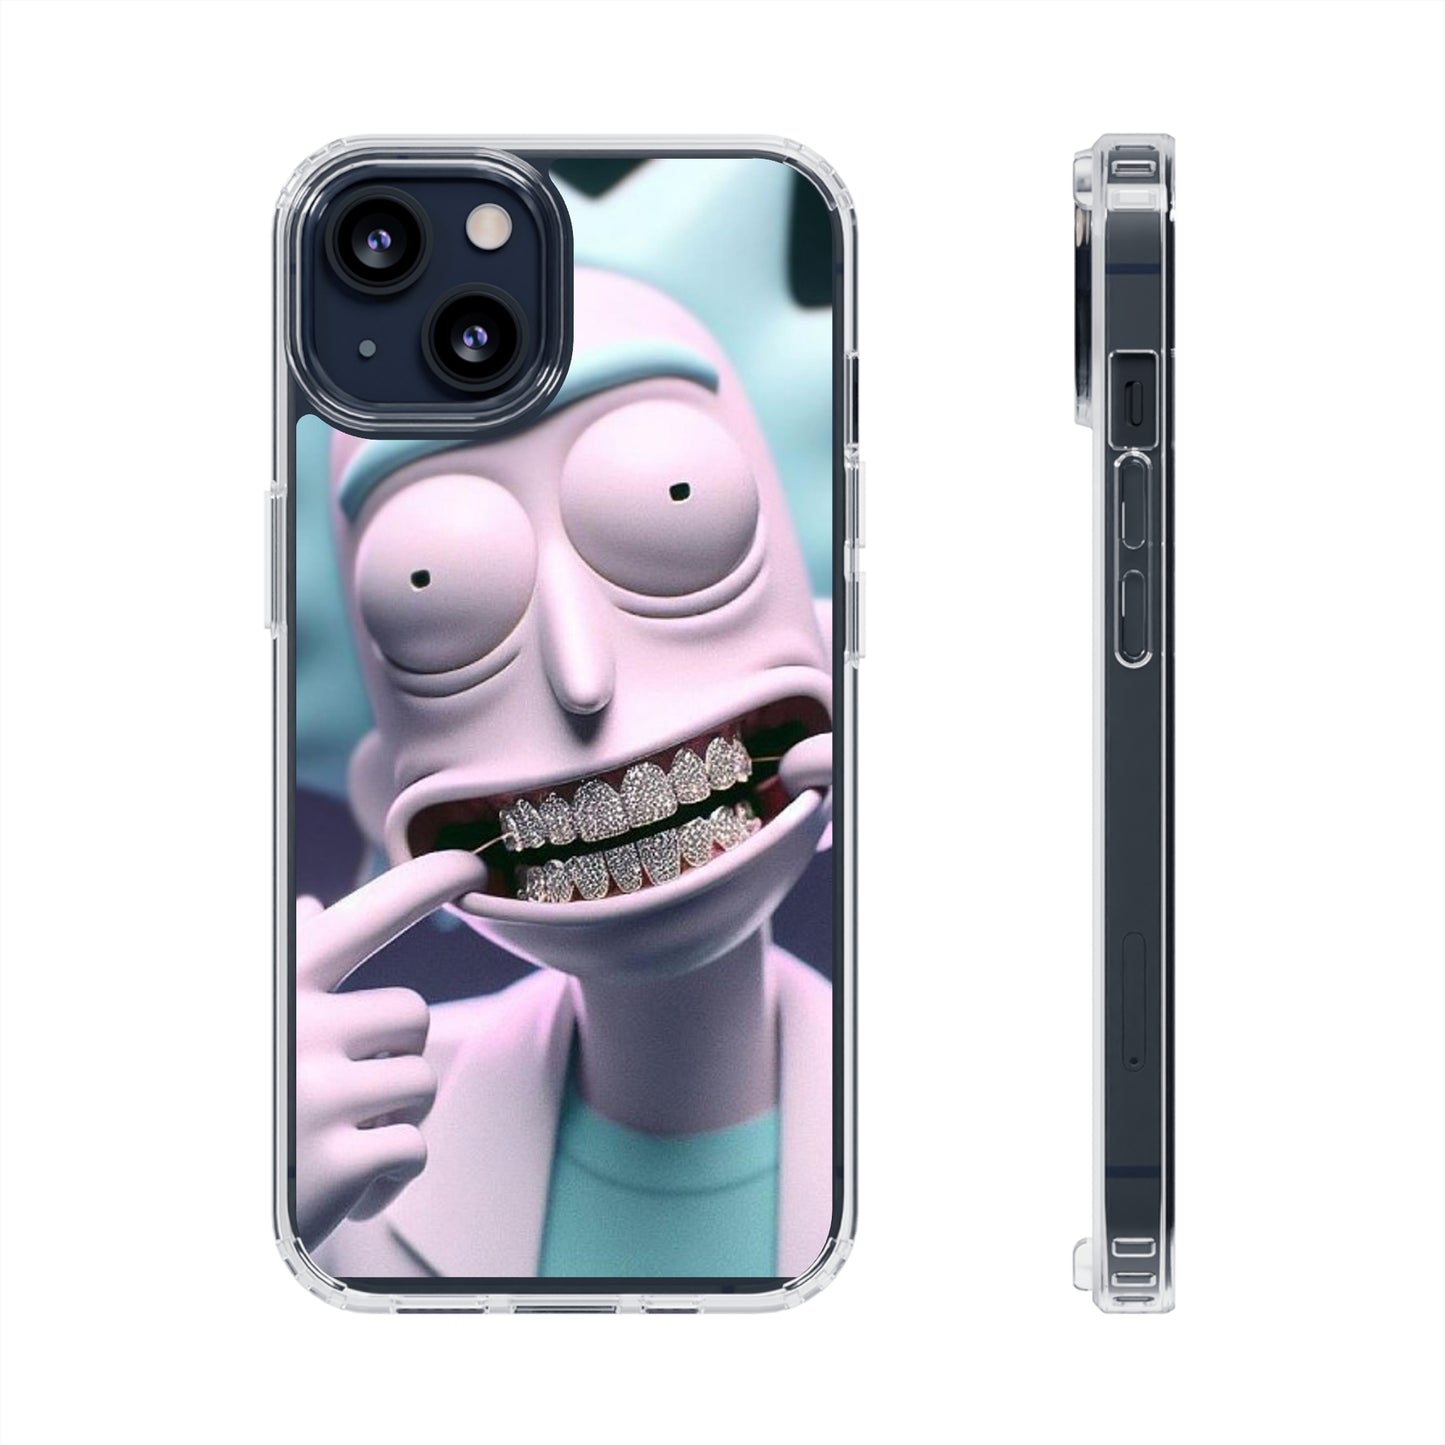 Clear CasesRickMorty